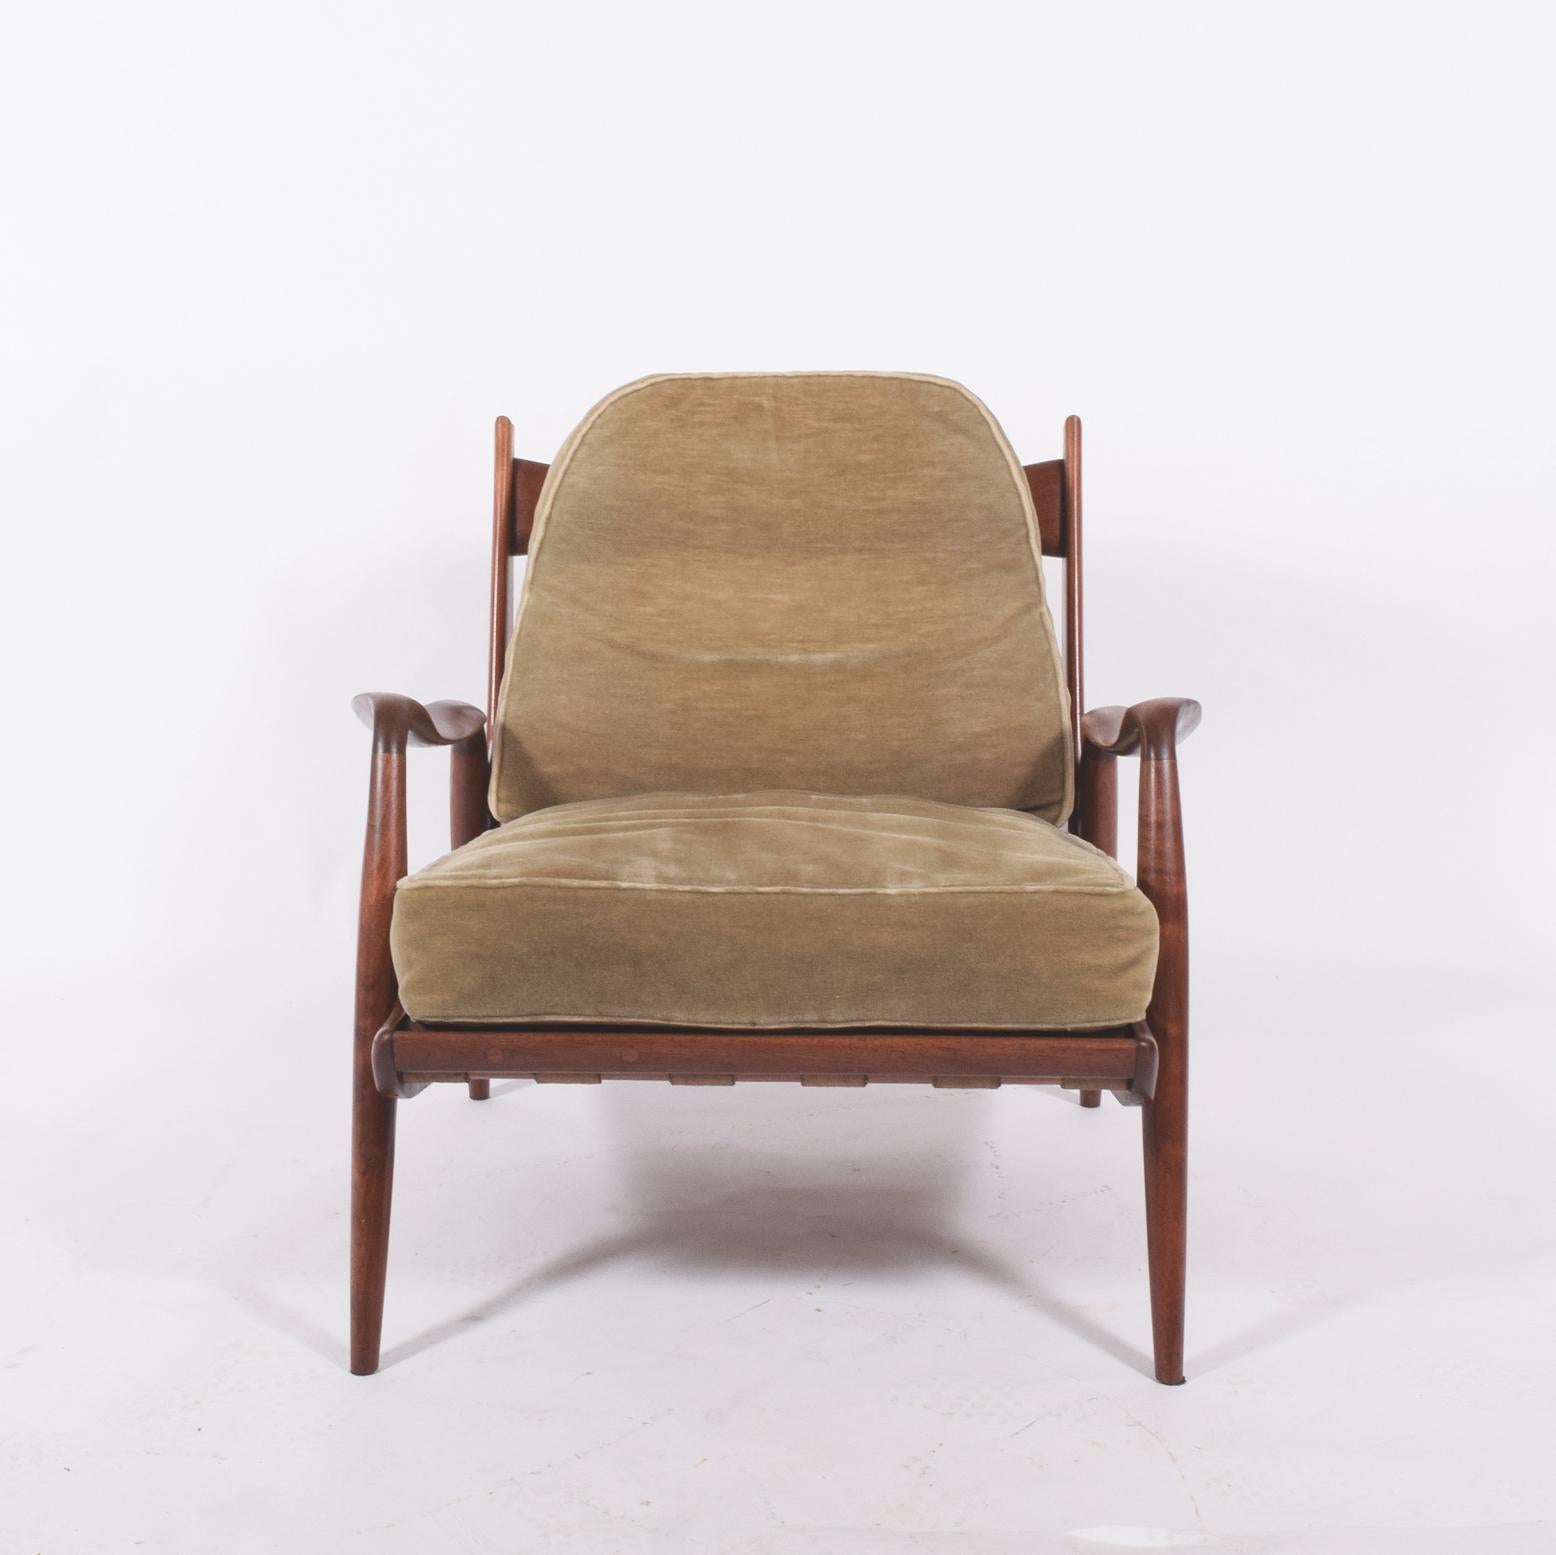 Early Studio new hope lounge chair sculpted in American black walnut by Phillip Lloyd Powell, original webbing original condition and upholstery purchased directly from Phillip Lloyd.